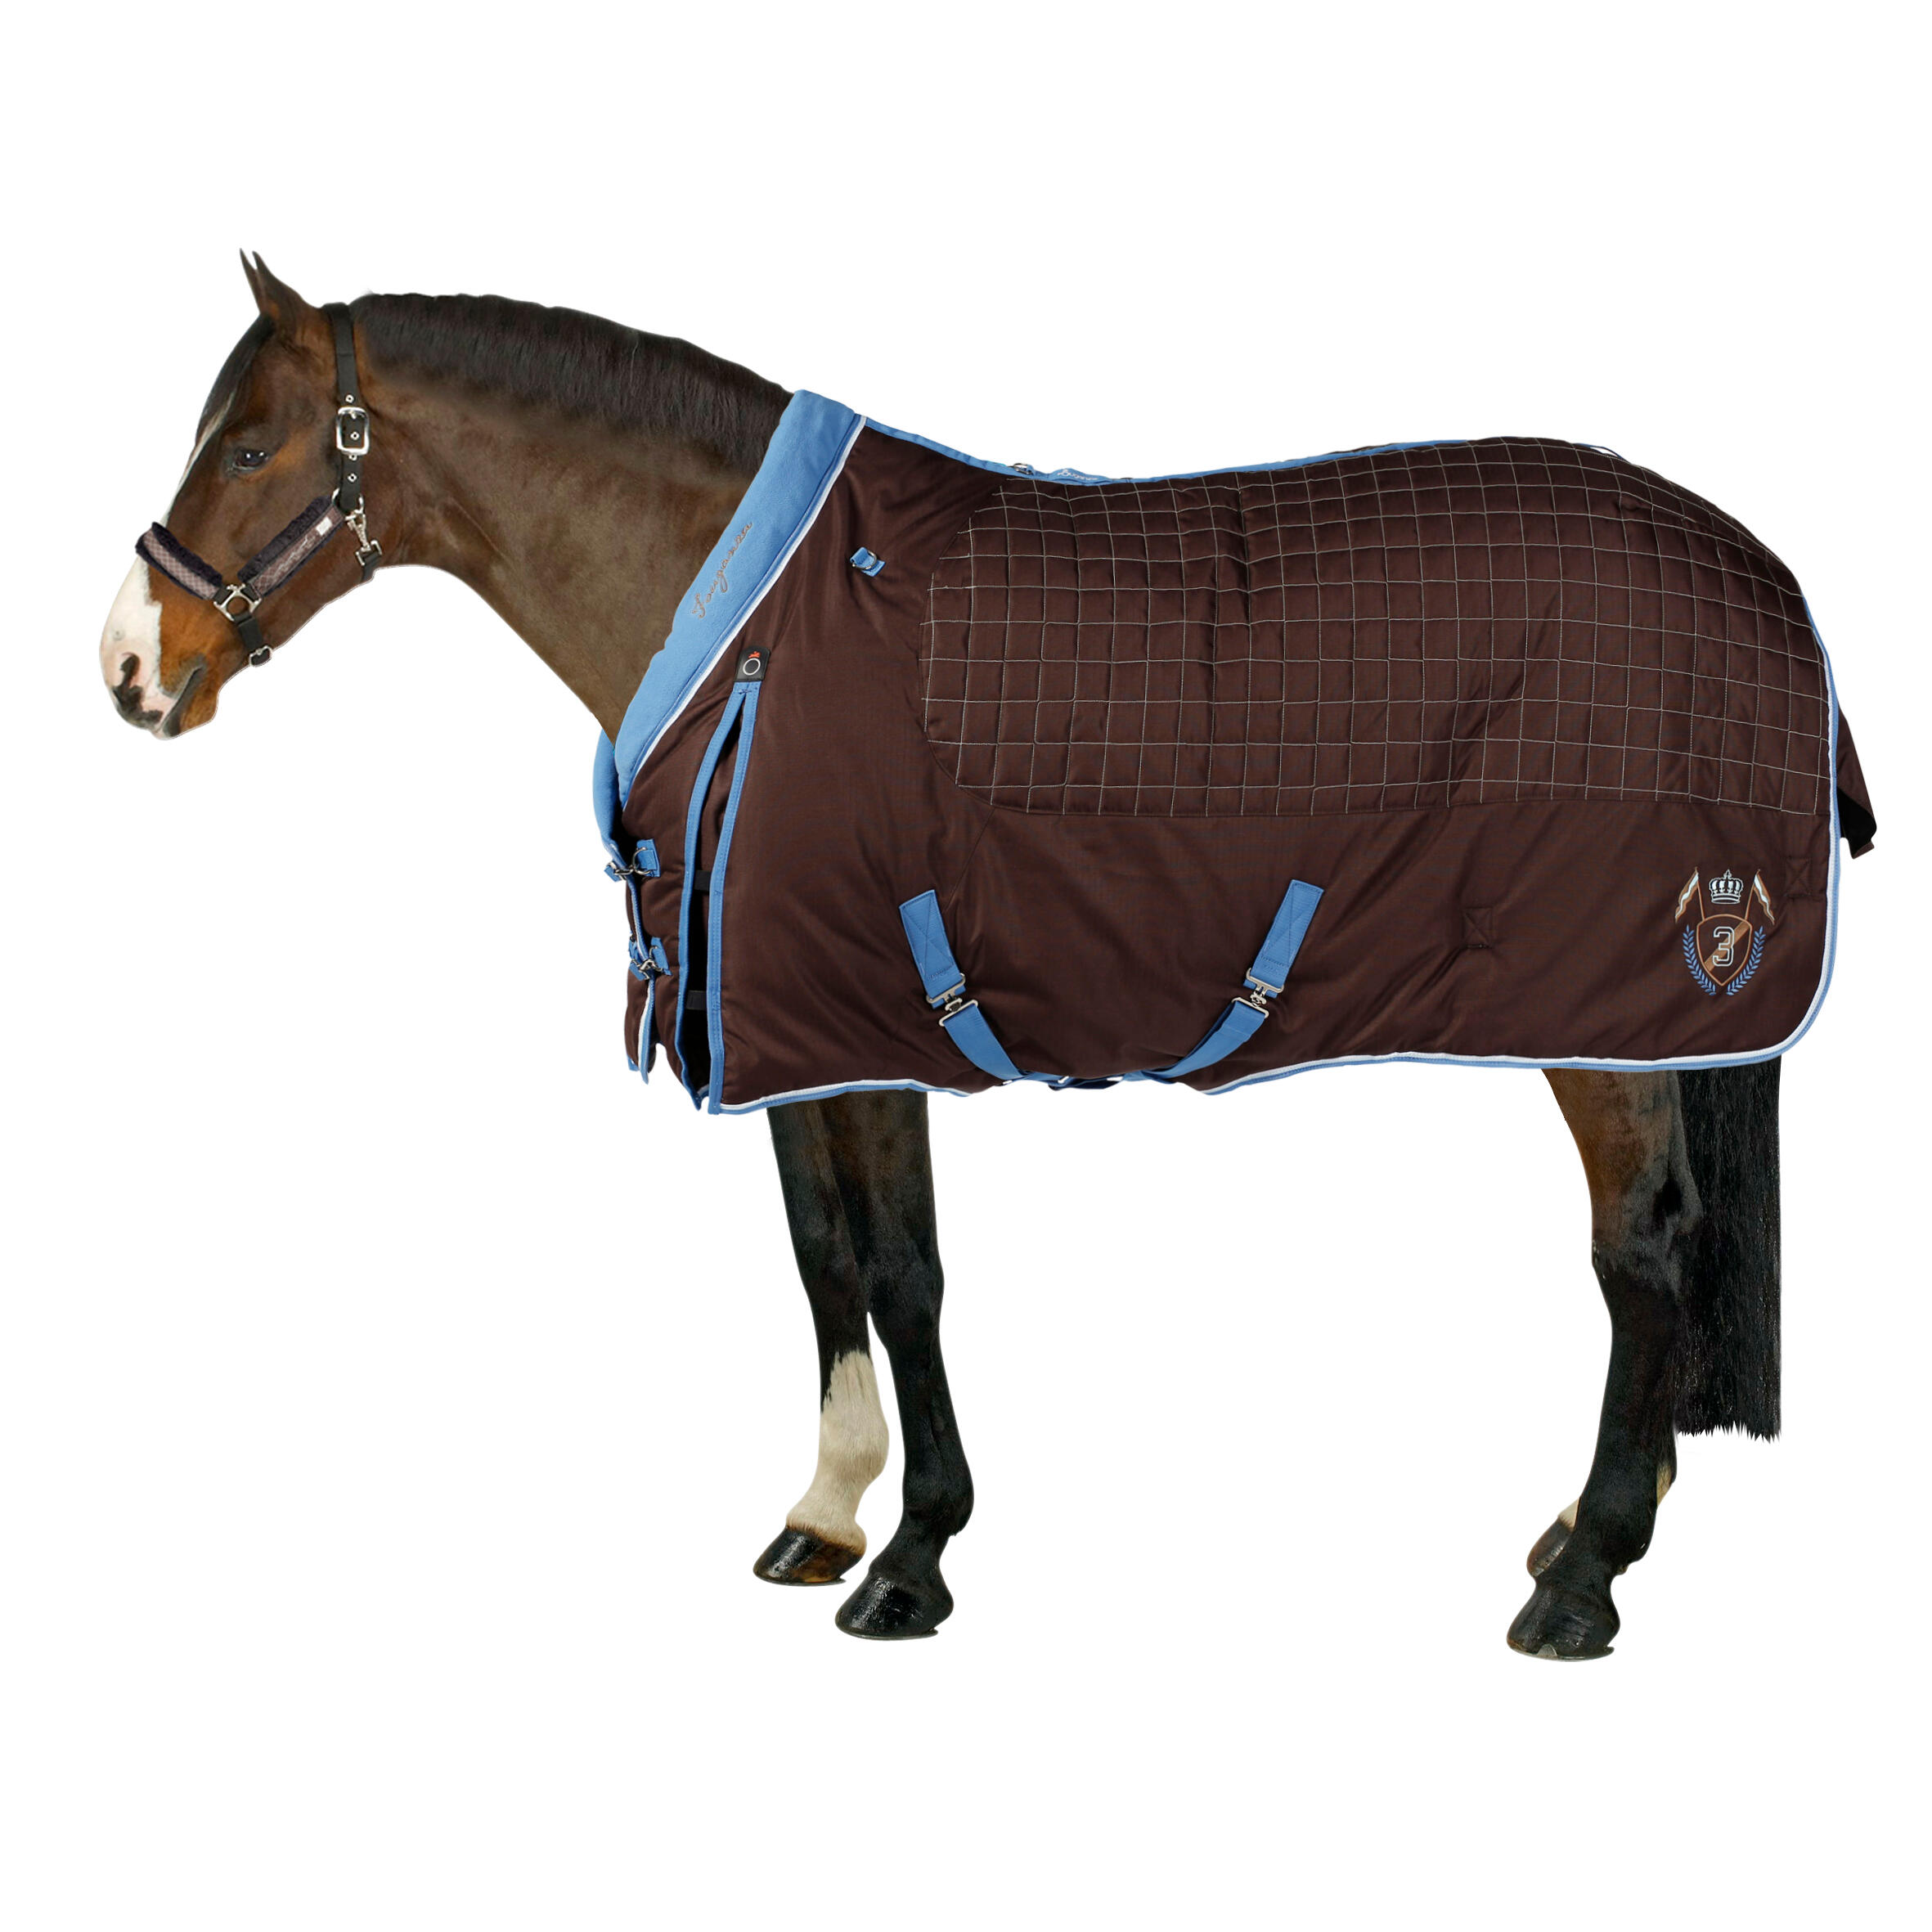 FOUGANZA Stable 400 "3" Horse Riding Stable Rug for Horse and Pony - Maori Brown/Blue